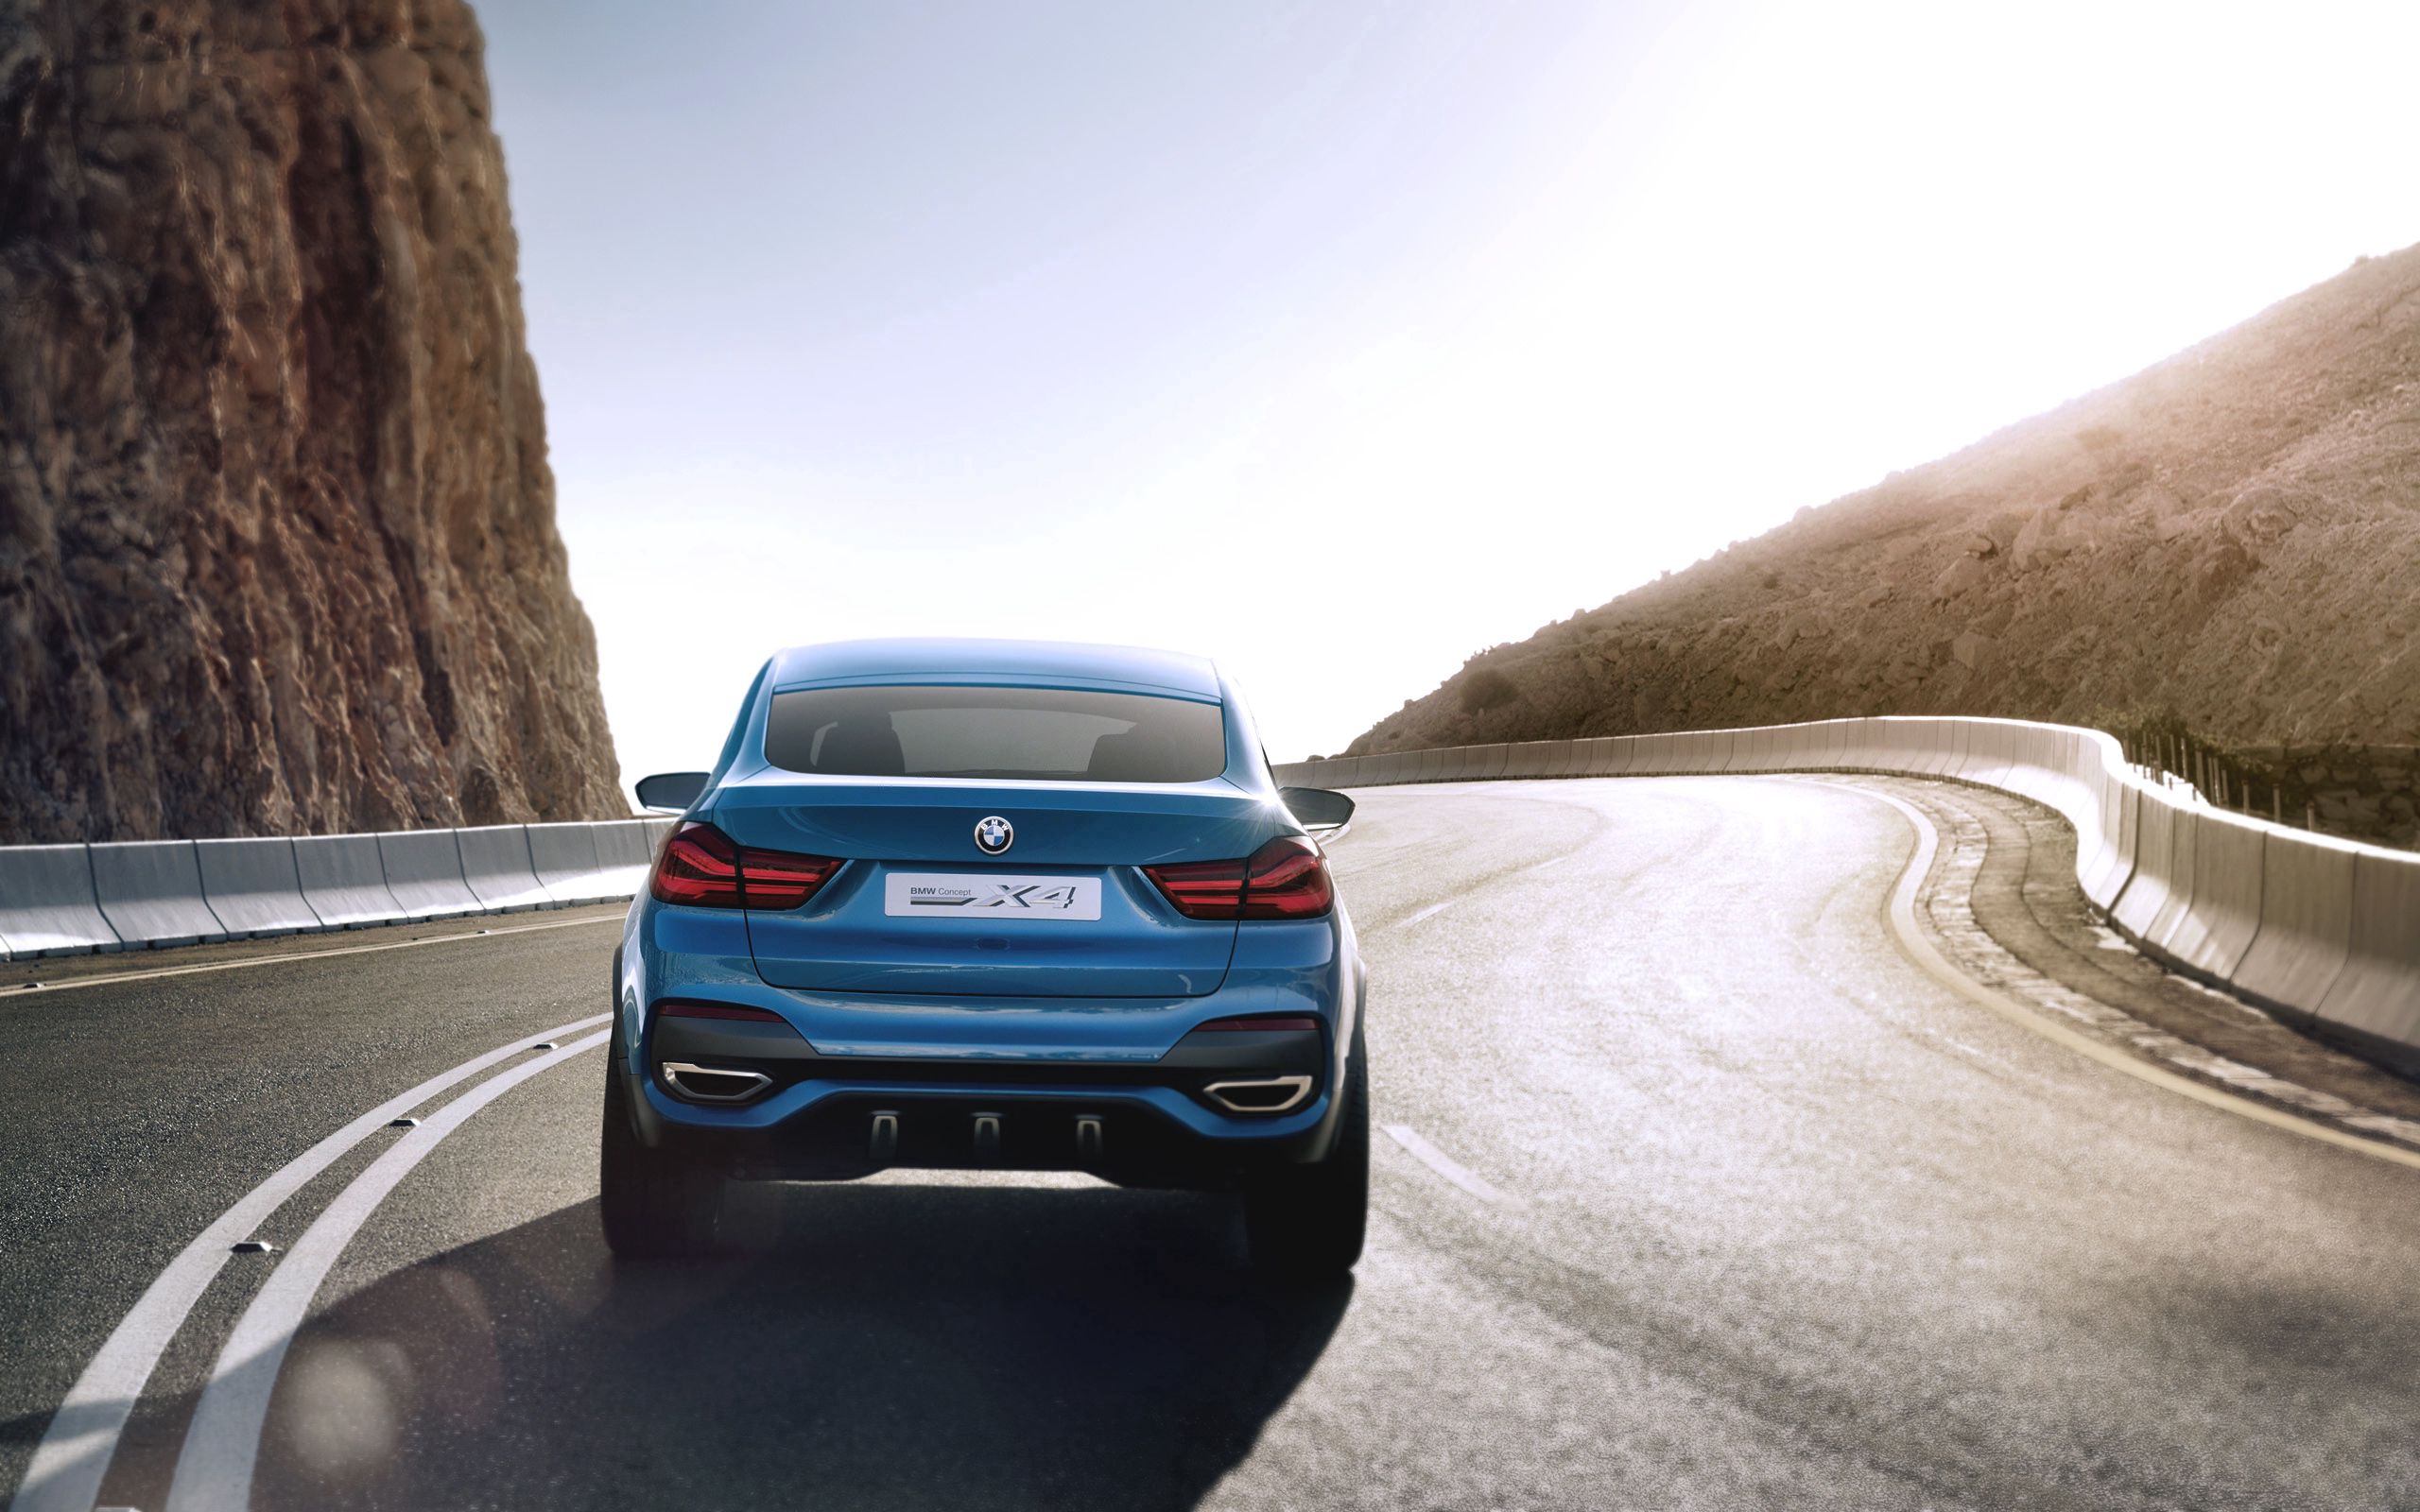 bmw, cars, turn, concept, back view, rear view, x4